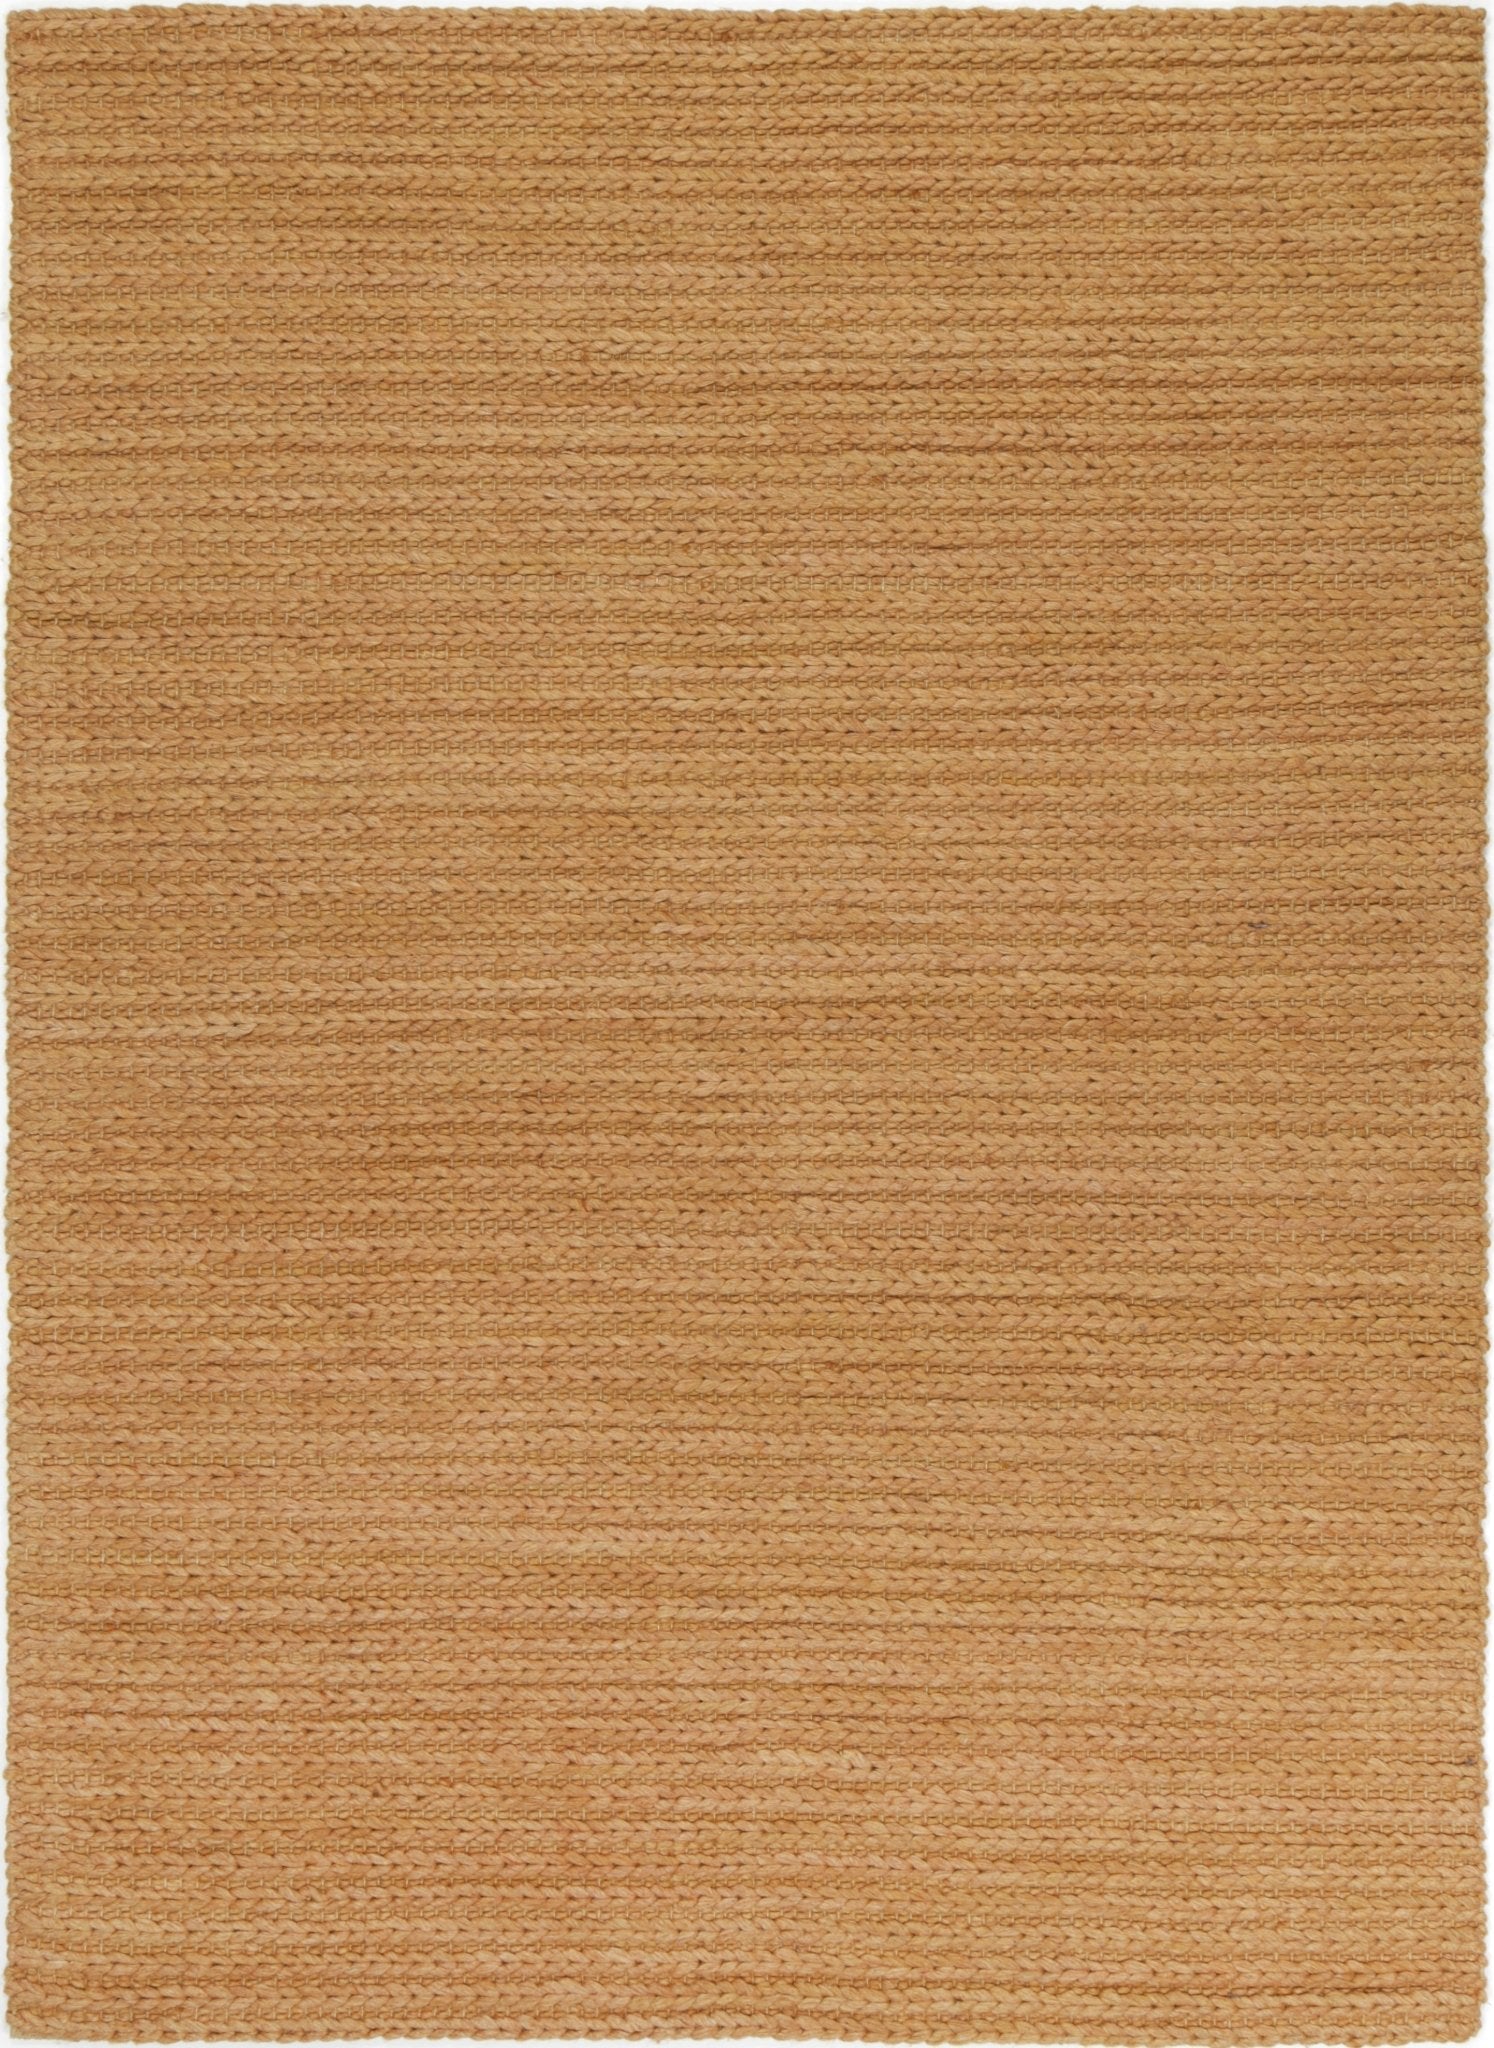 Rayna Cue Copper Wool Blend Rug - Area Rug - Rugs a Million